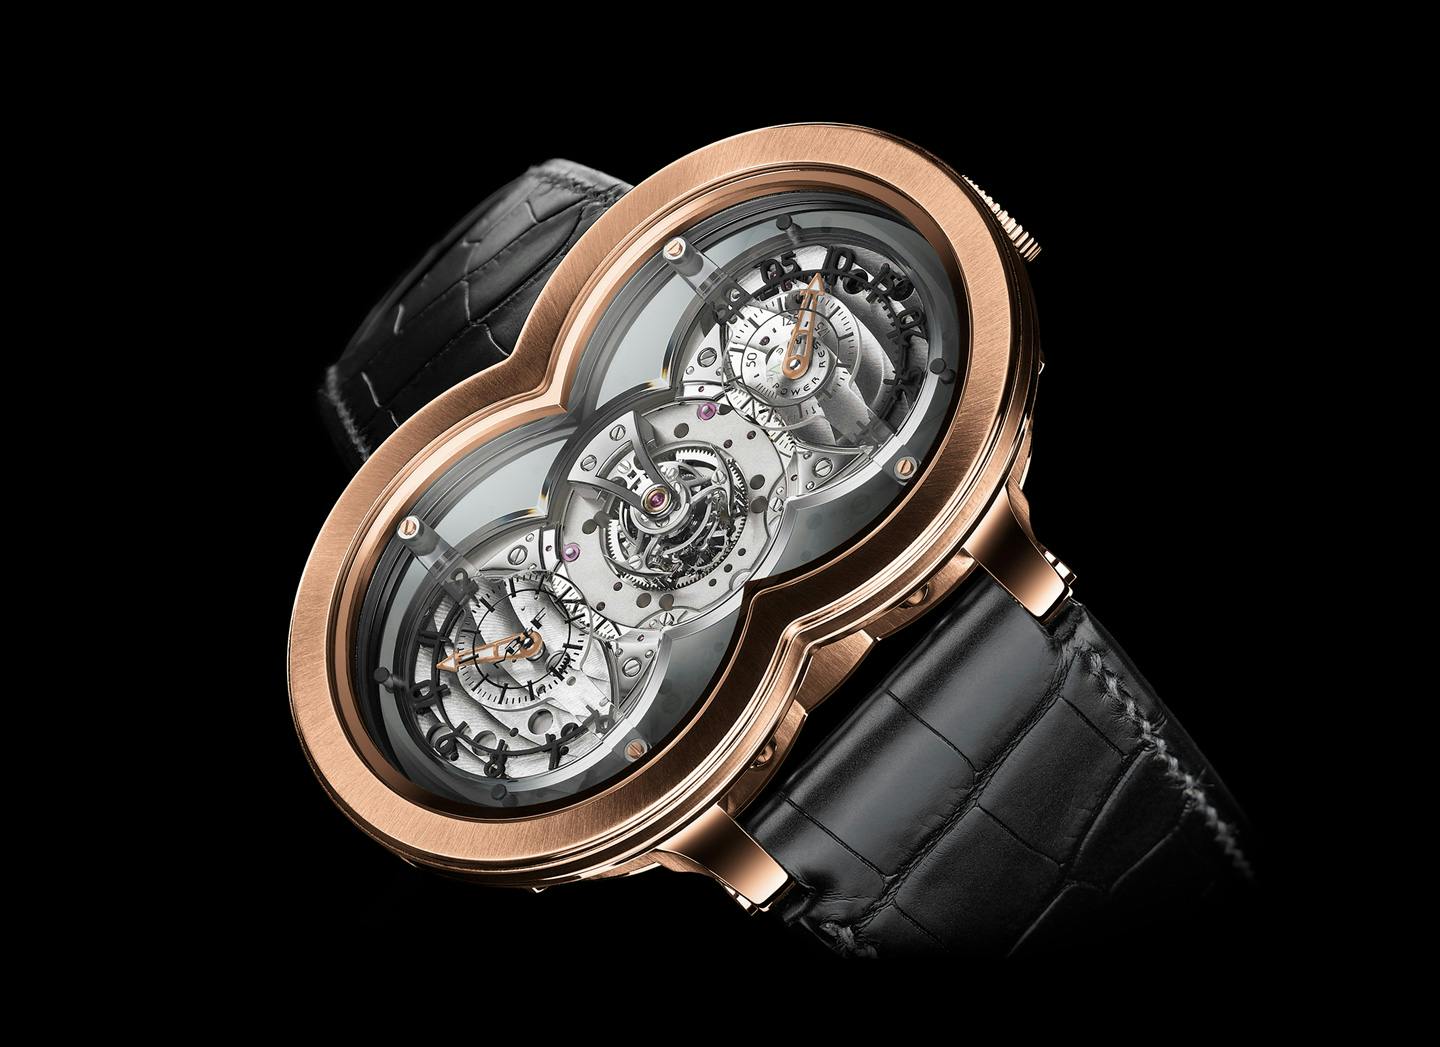 MB&F HM1 - The first watch released by MB&F